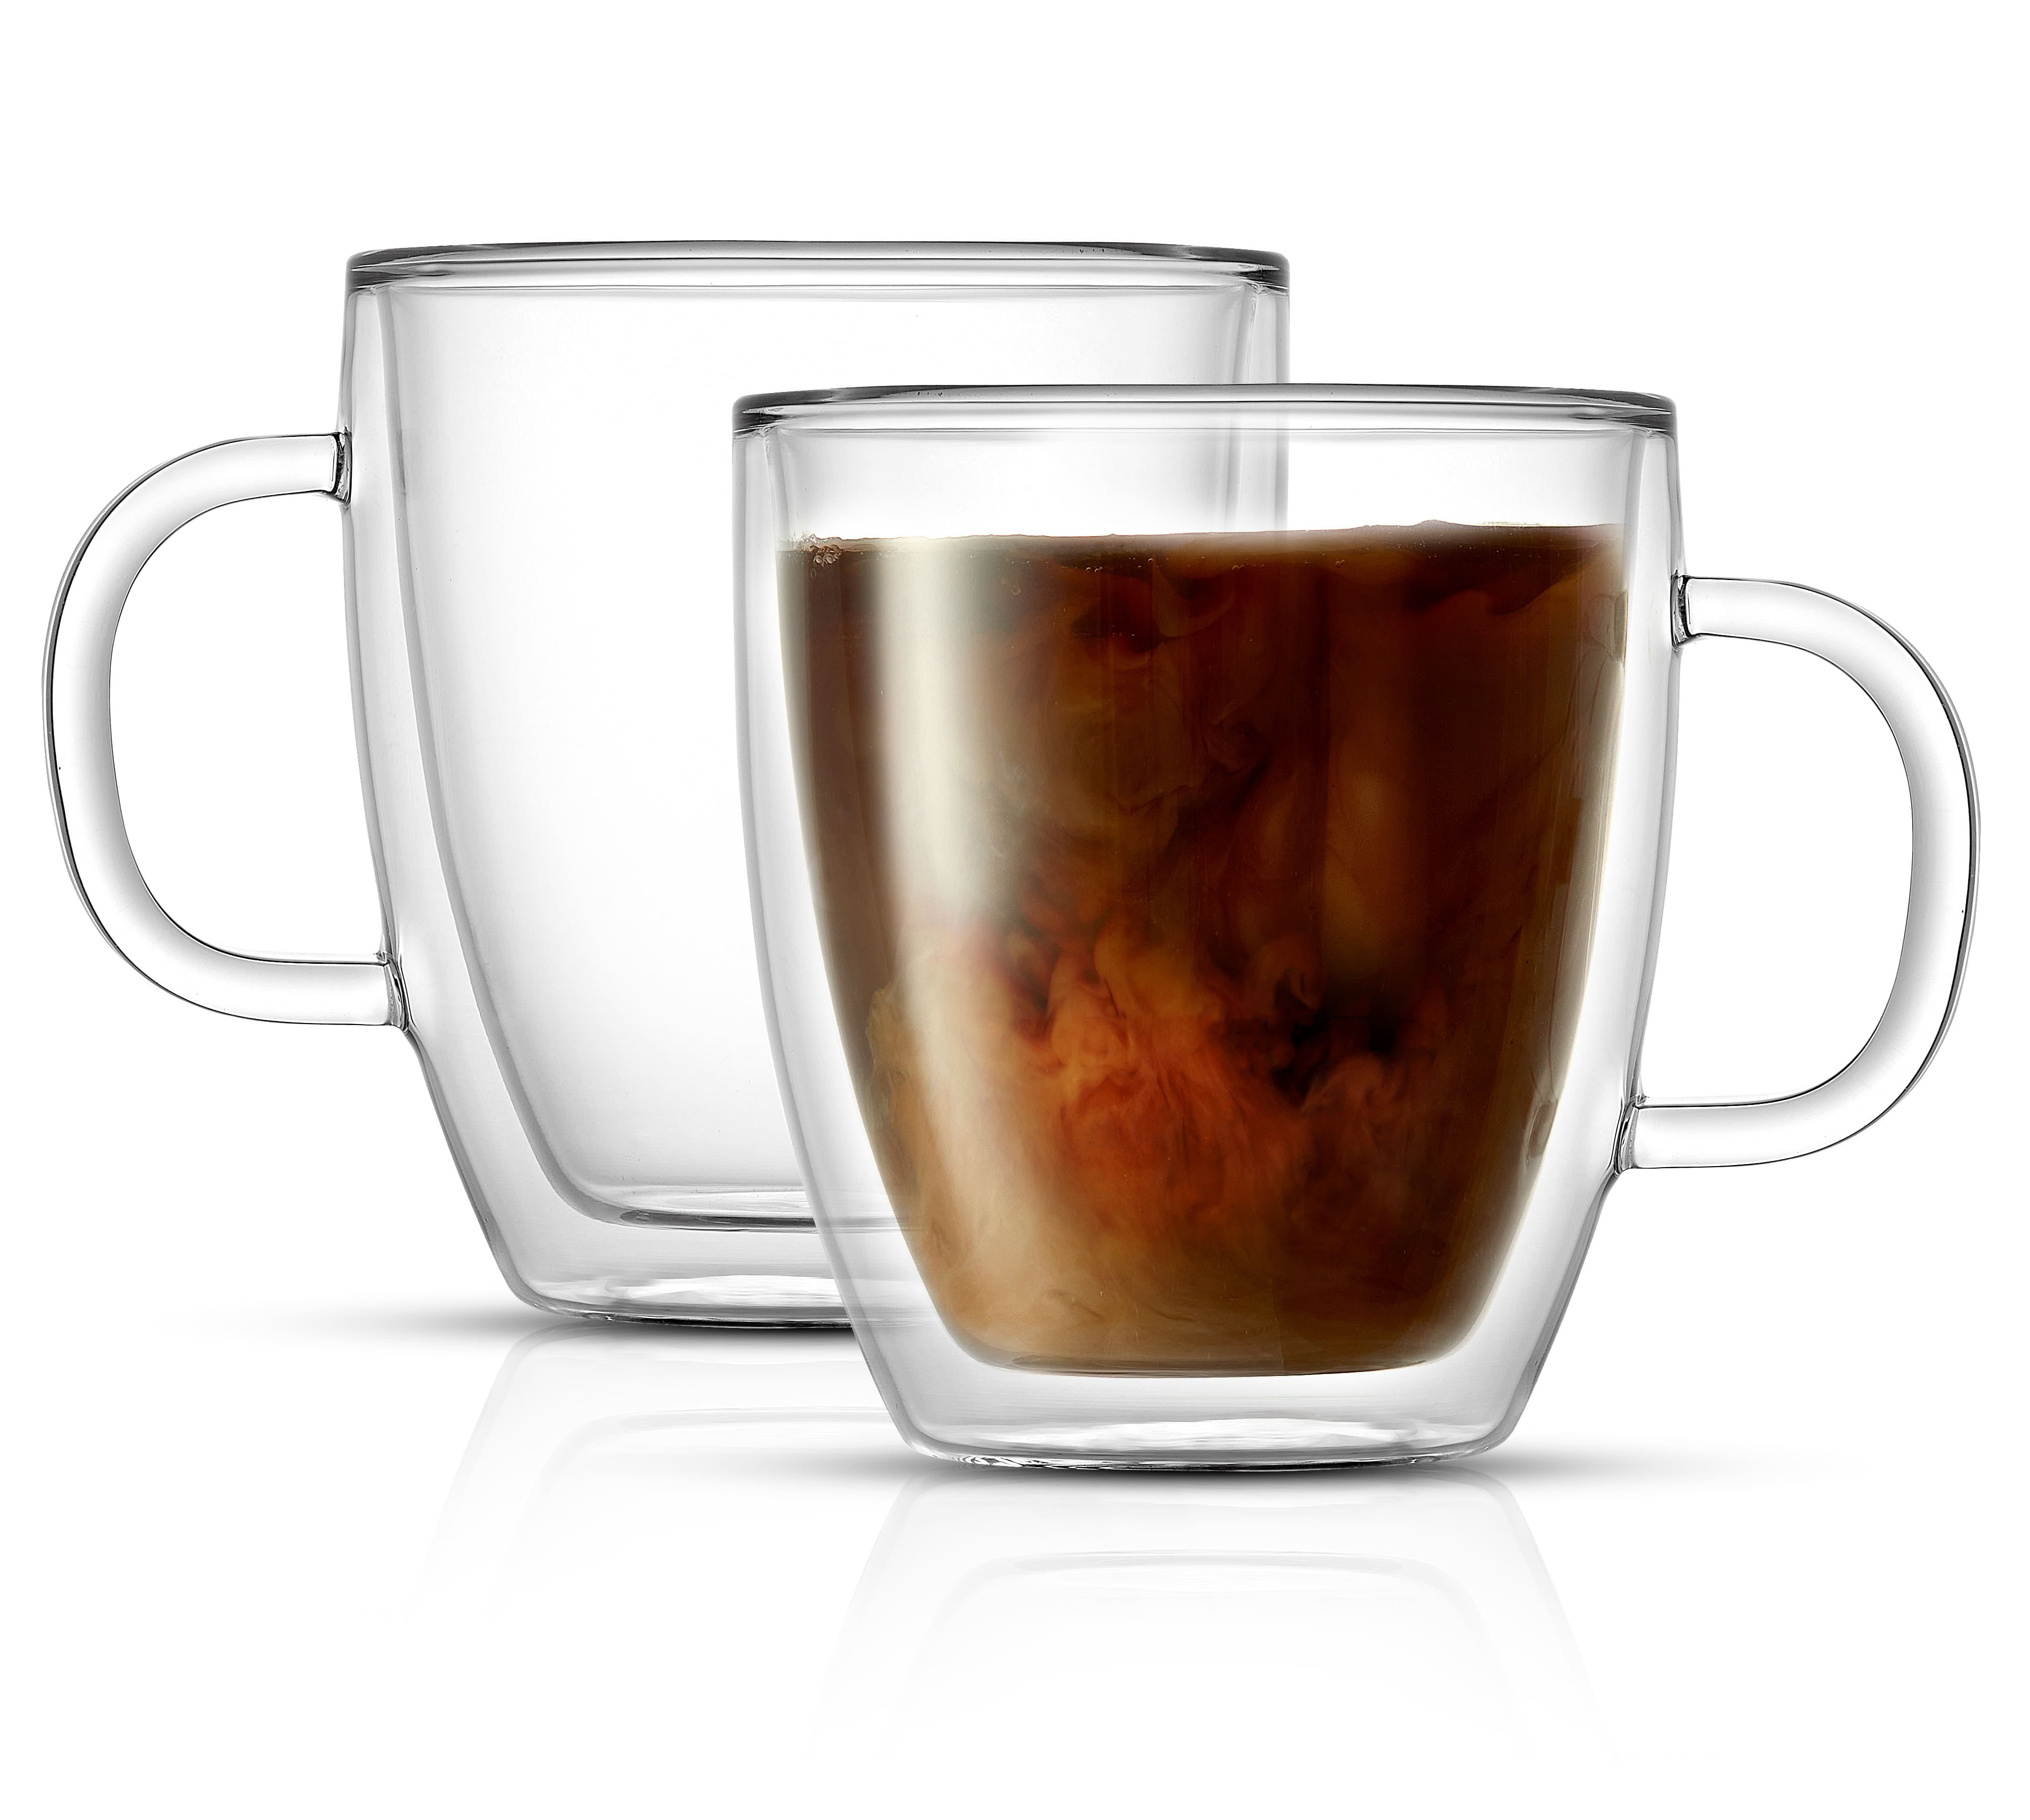 Joyjolt Double Wall Insulated Glass Coffee Mug Set Of 2 13 5 Oz With Handle For Hot Or Cold